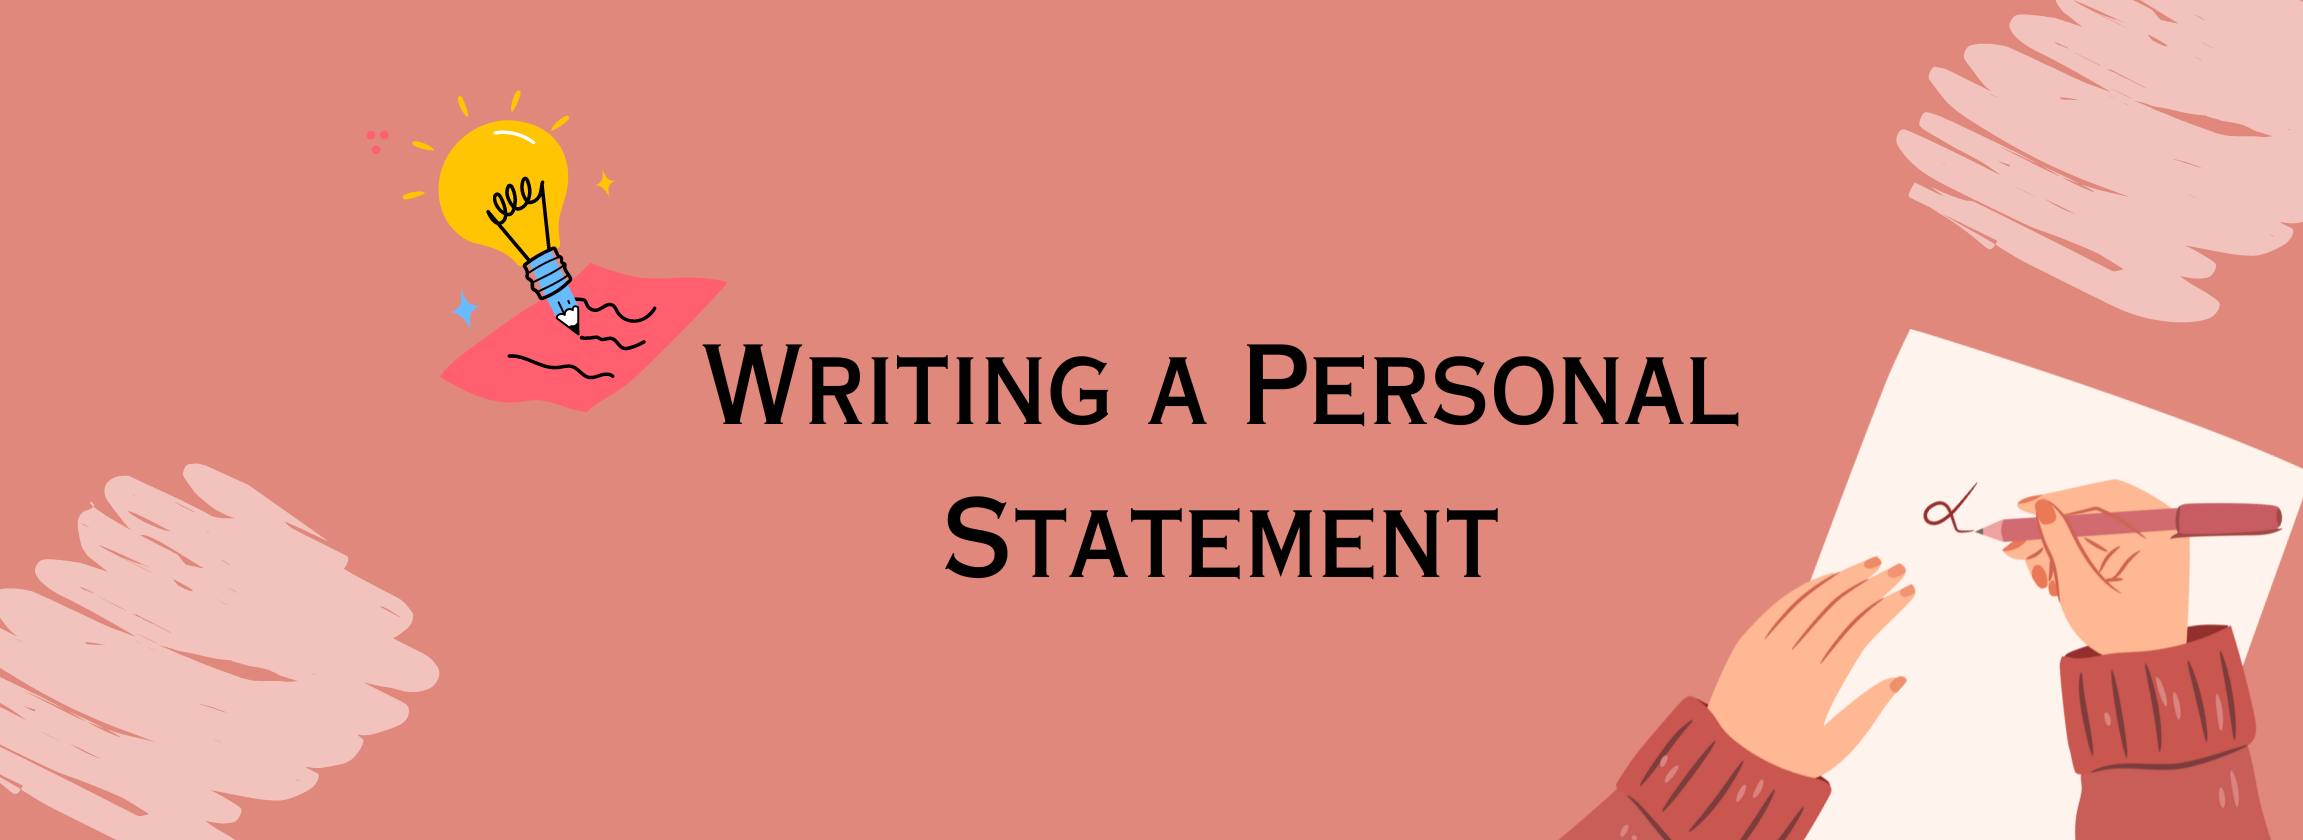 what should be included in a personal statement for graduate school